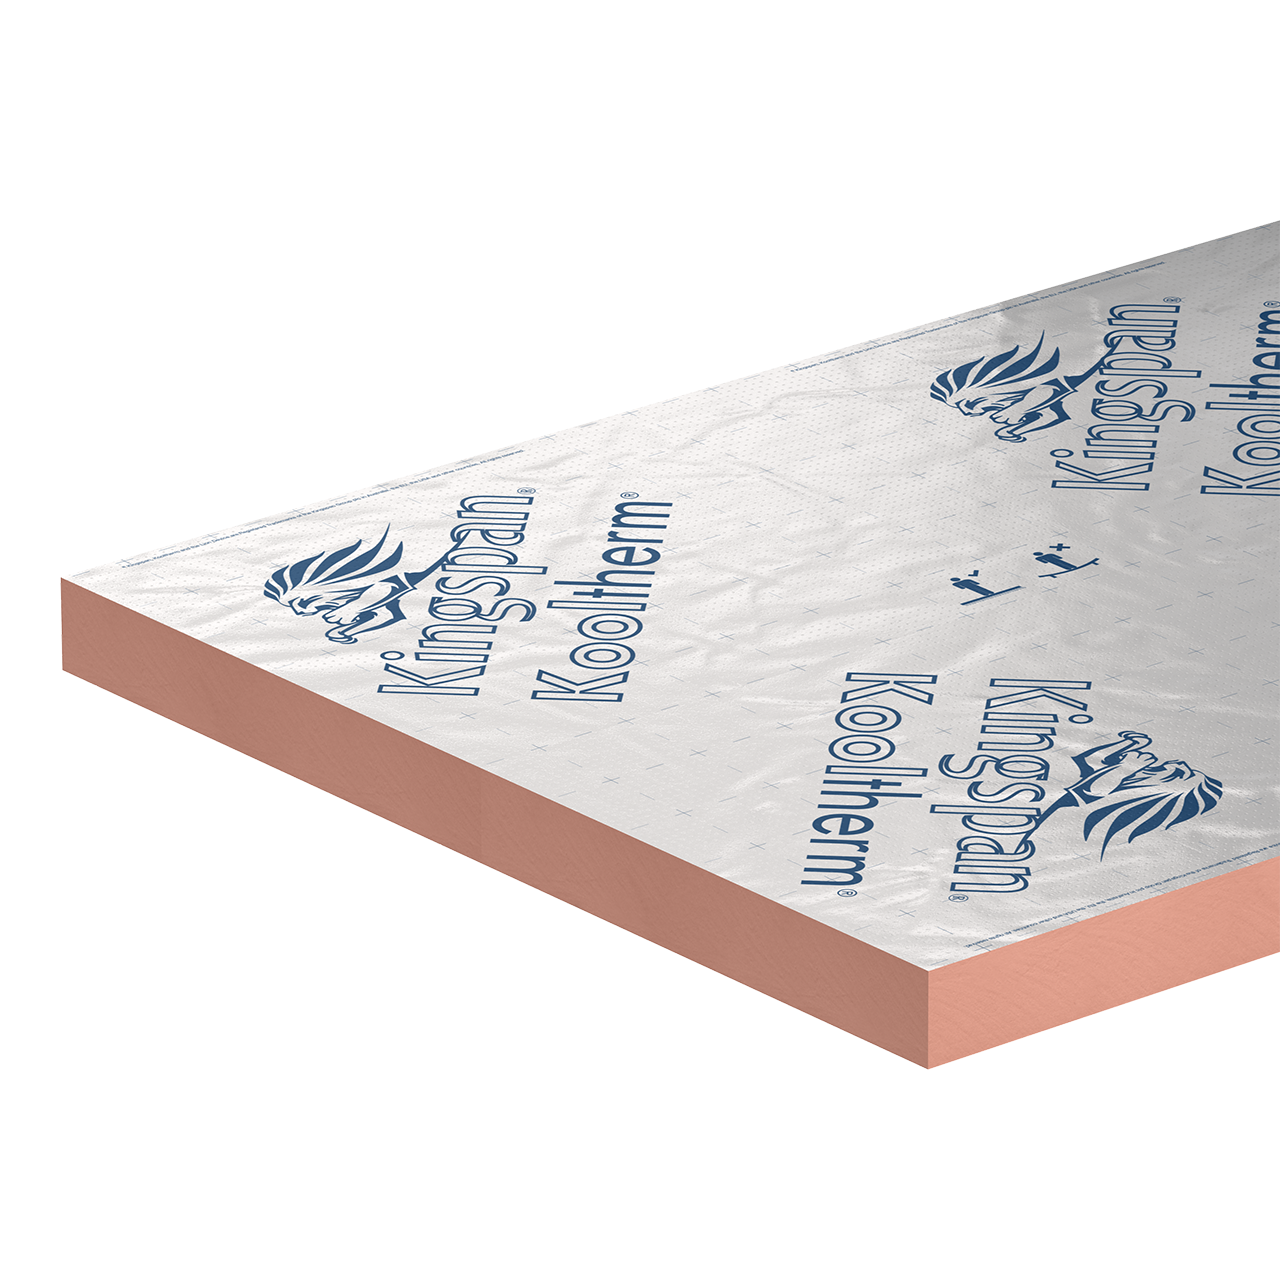 Kingspan Kooltherm K112 Framing Insulation Board 2400mm x 1200mm x 120mm (Pack of 2)